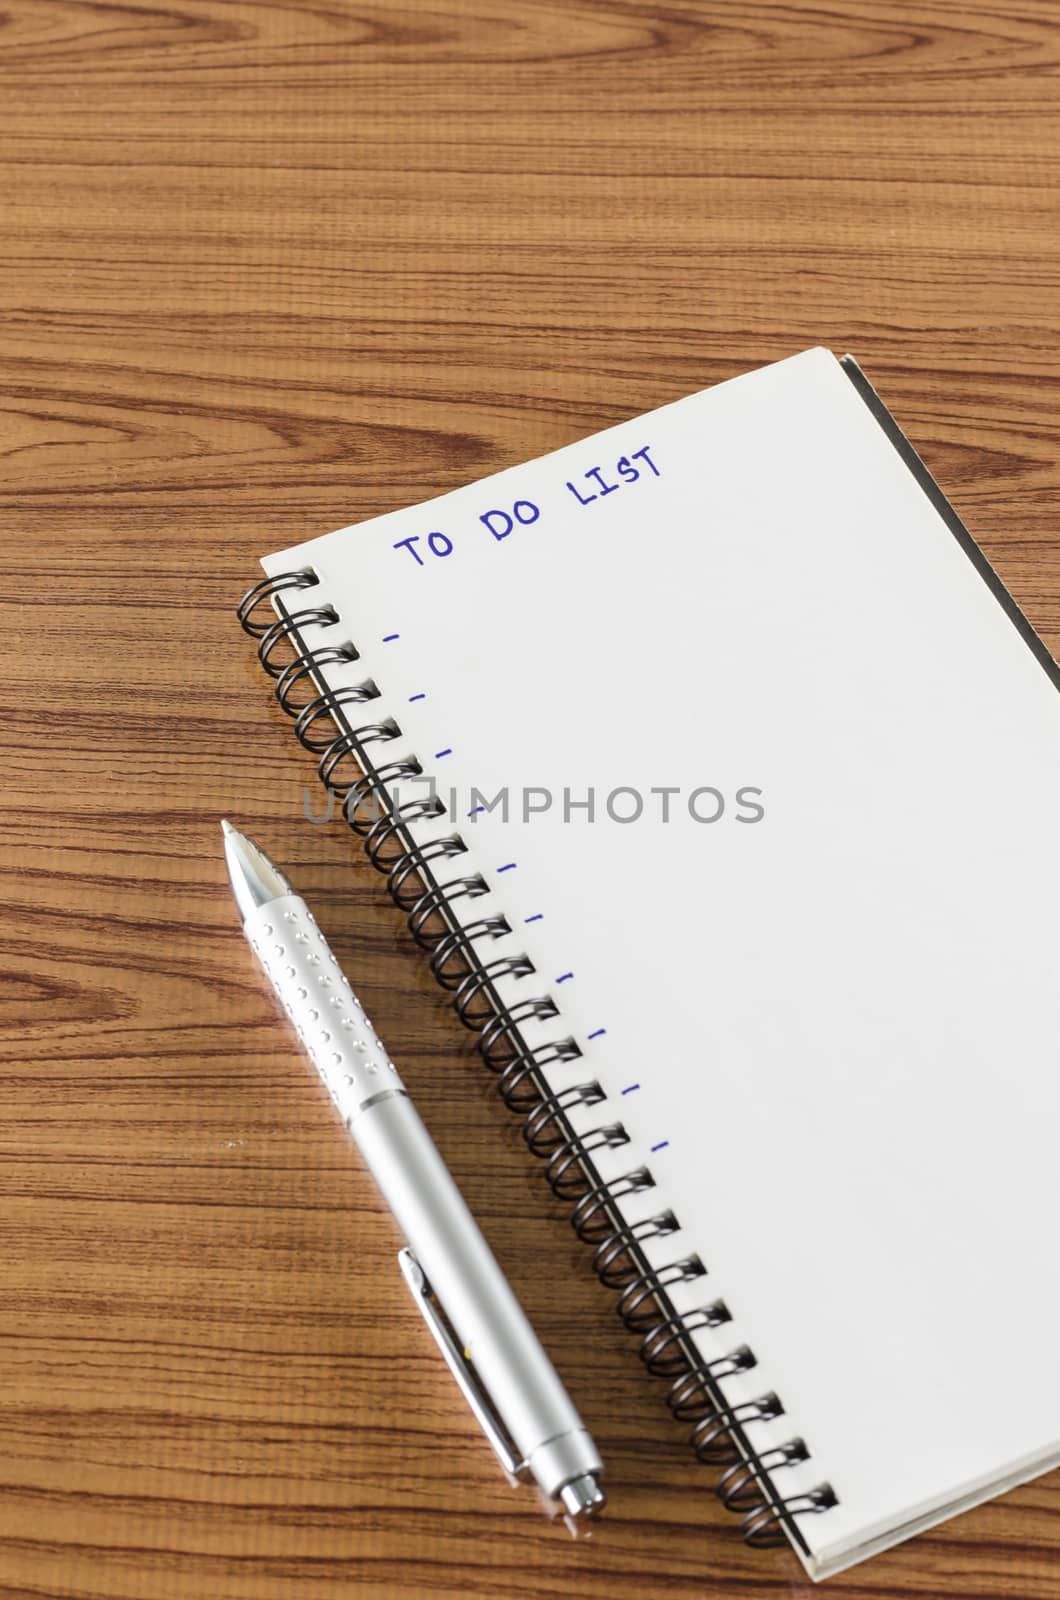 notebook and pen with word to do list on wood background